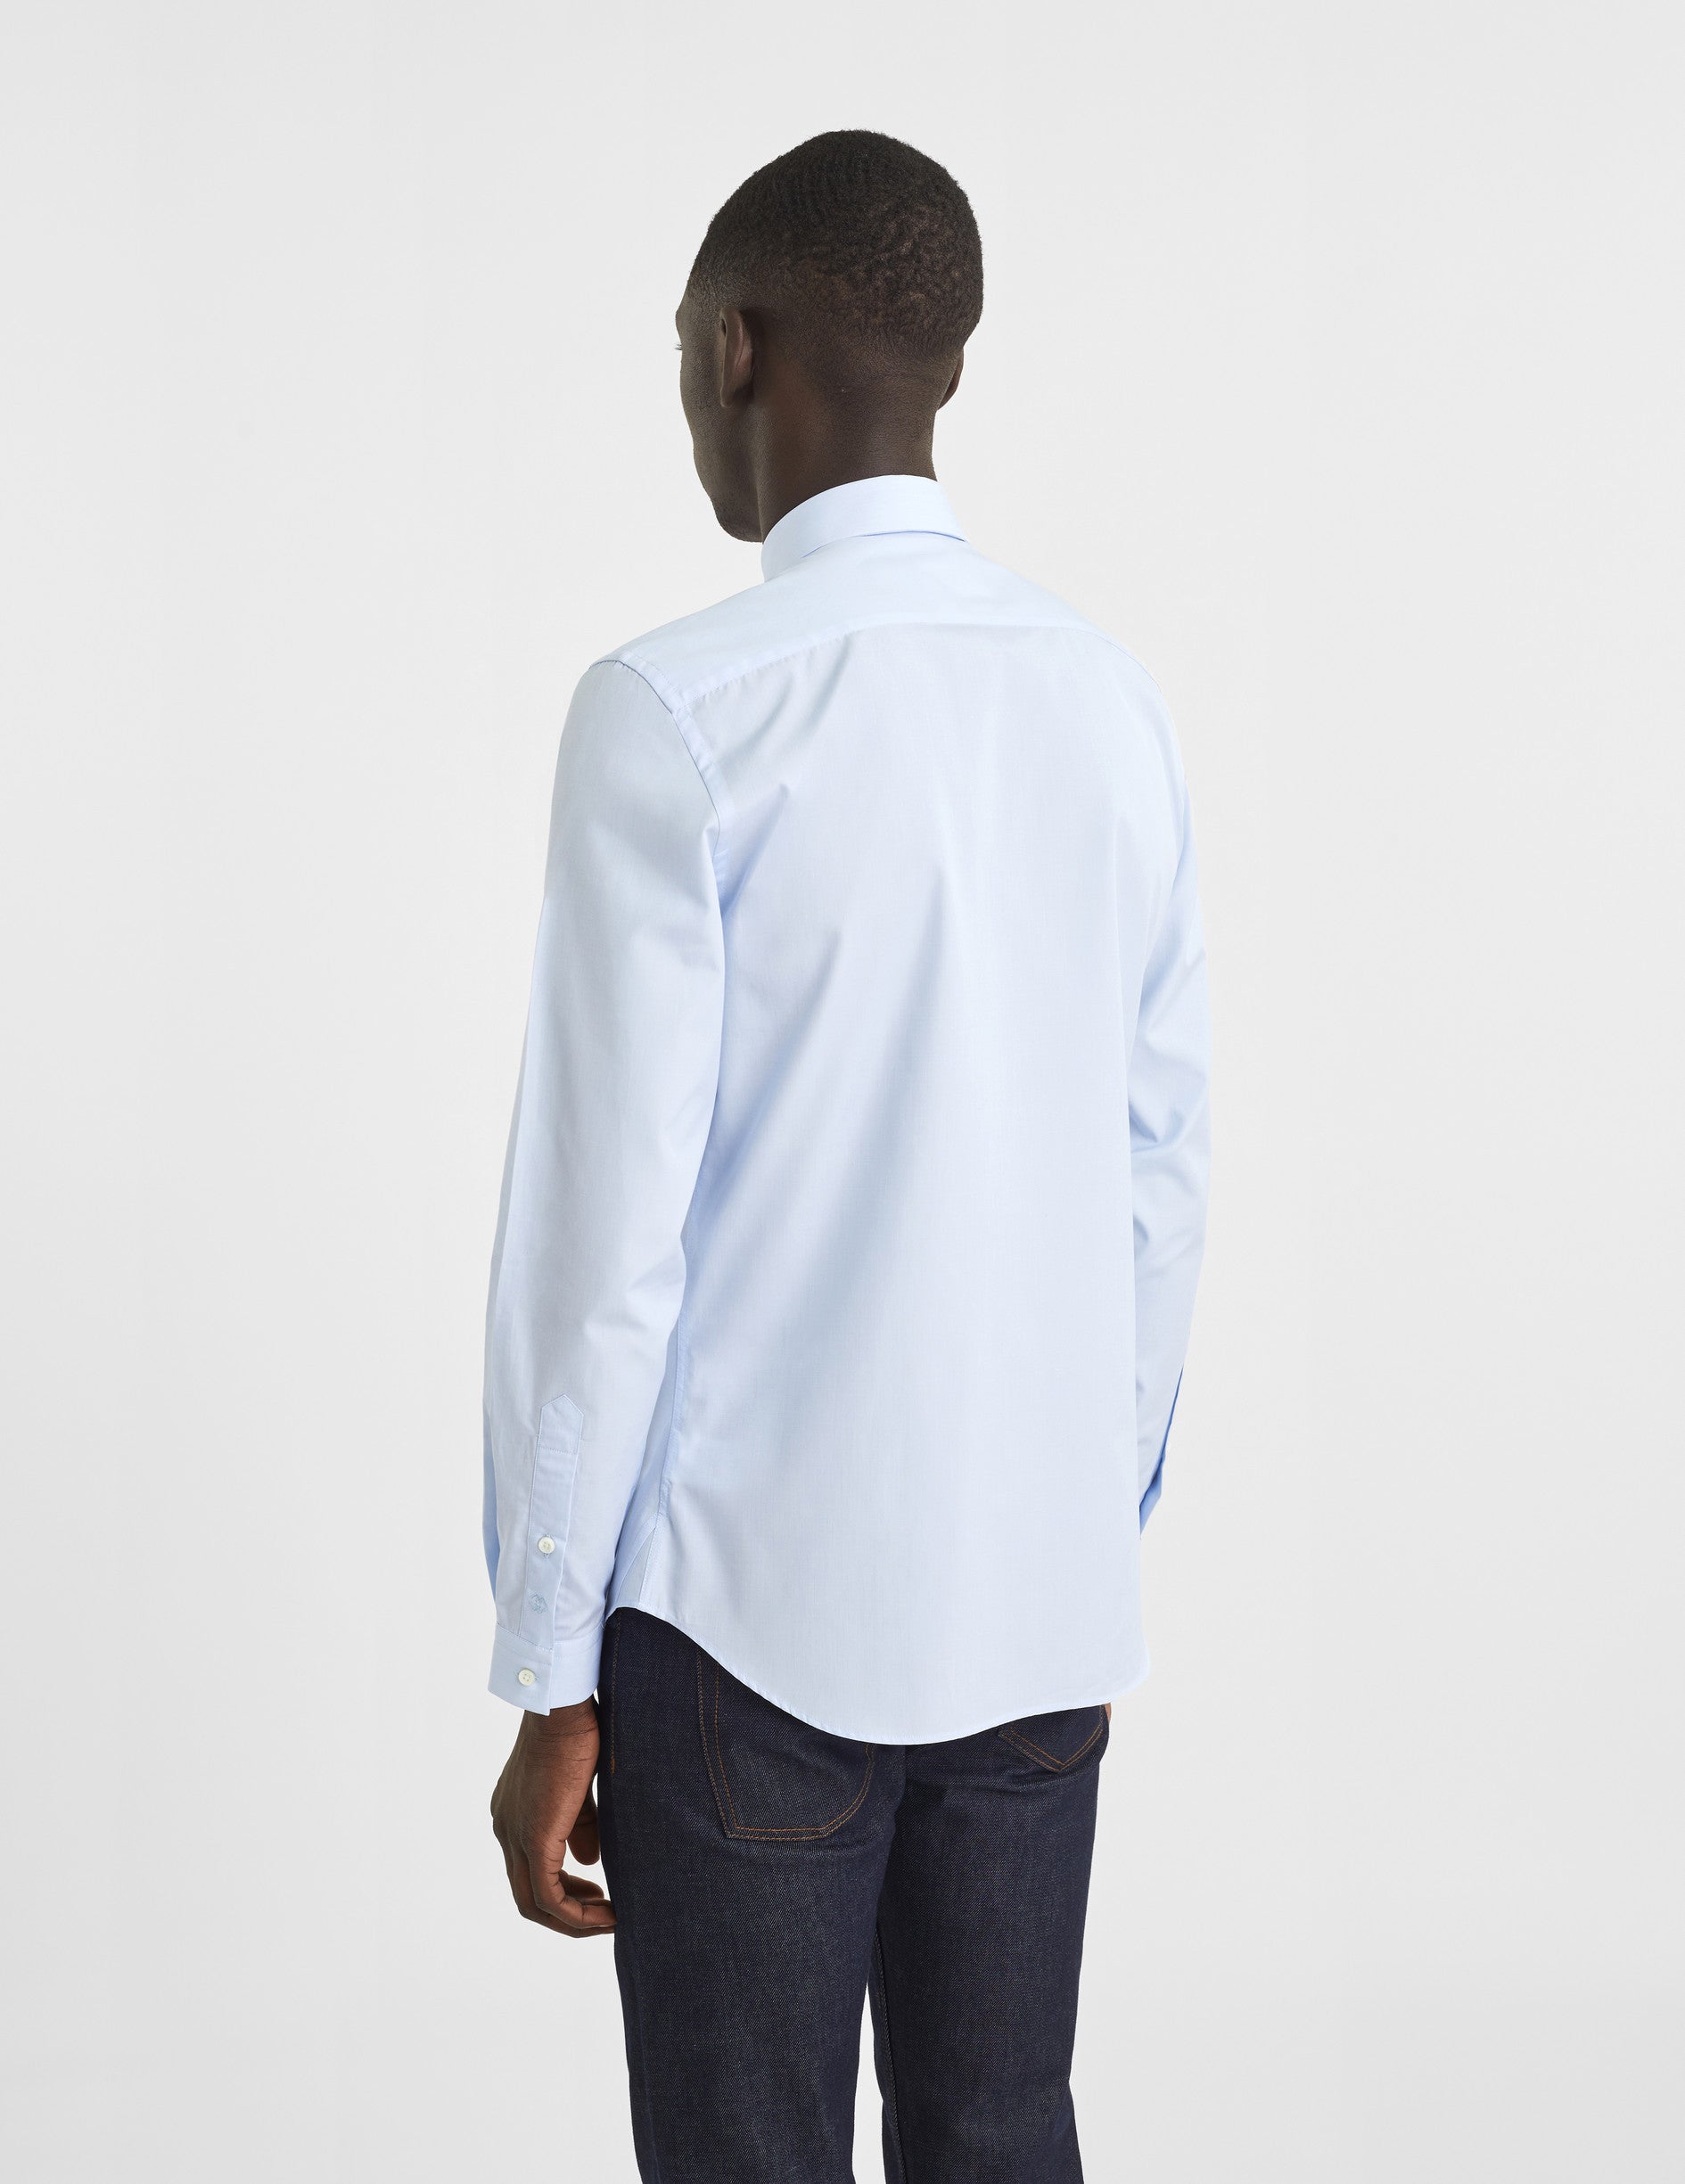 Blue fitted shirt - Wire to wire - Thin Collar